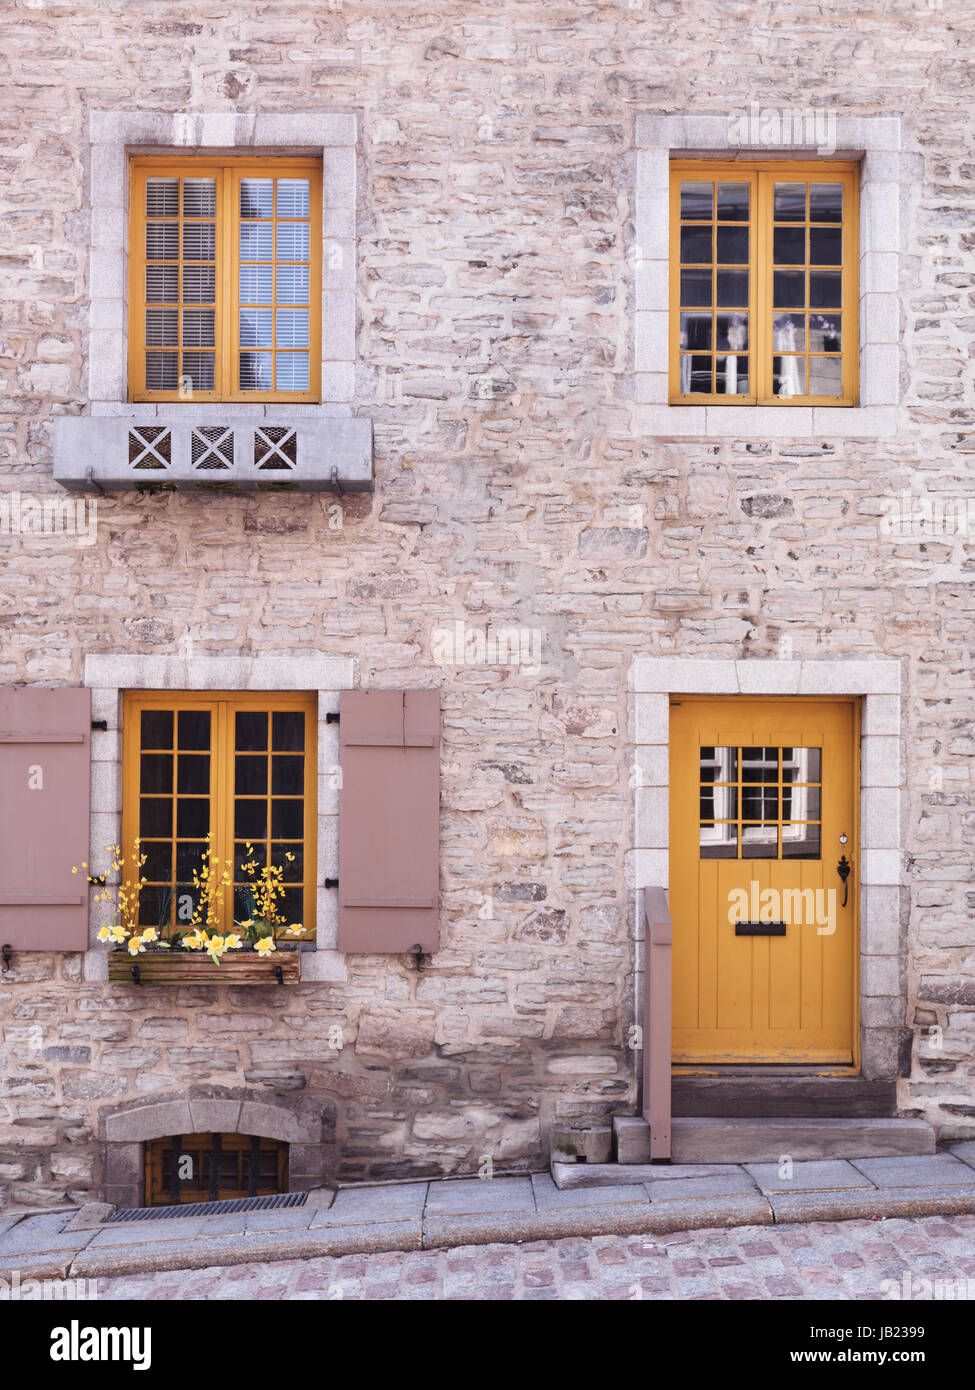 Door and windows of a historic house in Old Quebec City, architectural details. Quebec, Canada. Place Royale, Ville de QuÃ©bec. Stock Photo